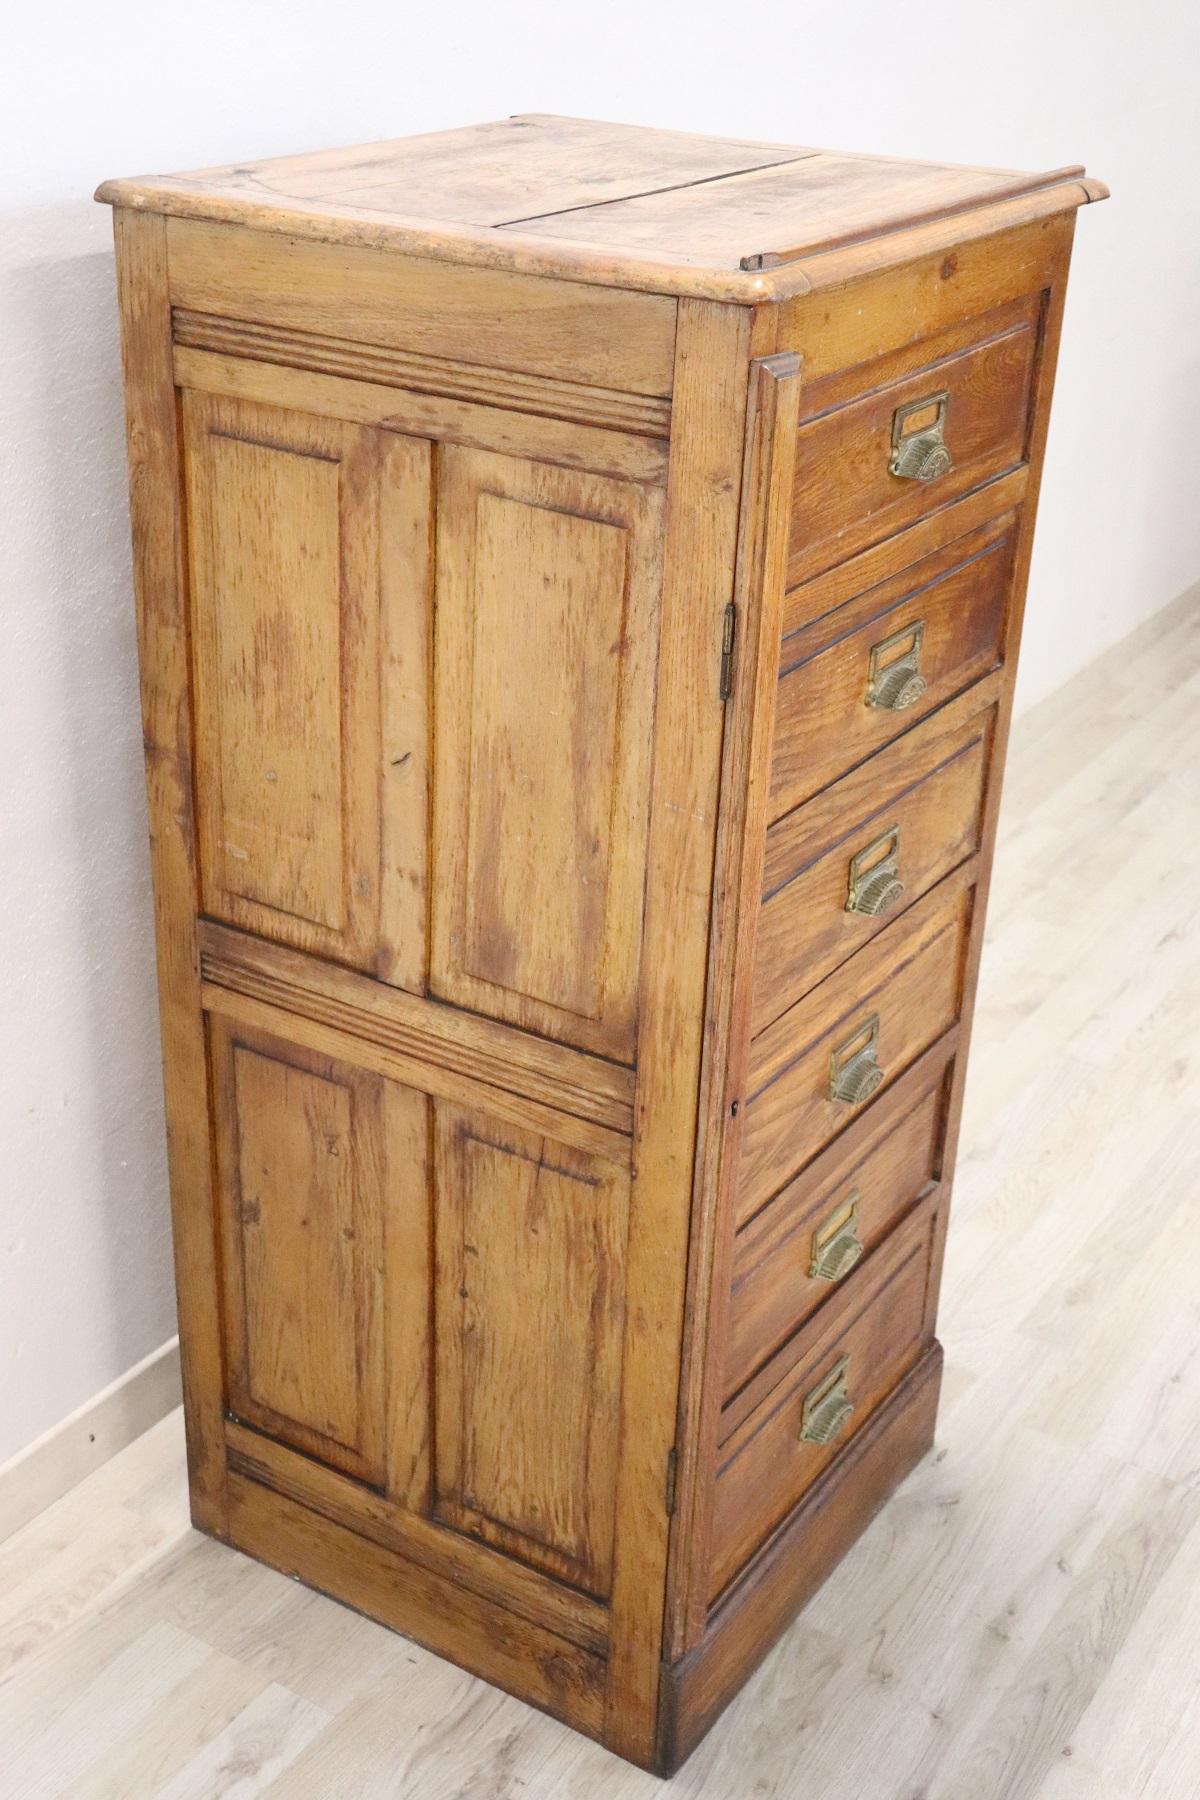 Italian Art Deco chest of drawers 1930s in solid oakwood. Very linear and essential with six comfortable drawers. These chests of drawers were born to be used in offices. The top rises and allows the documents extracted from the drawers to be placed